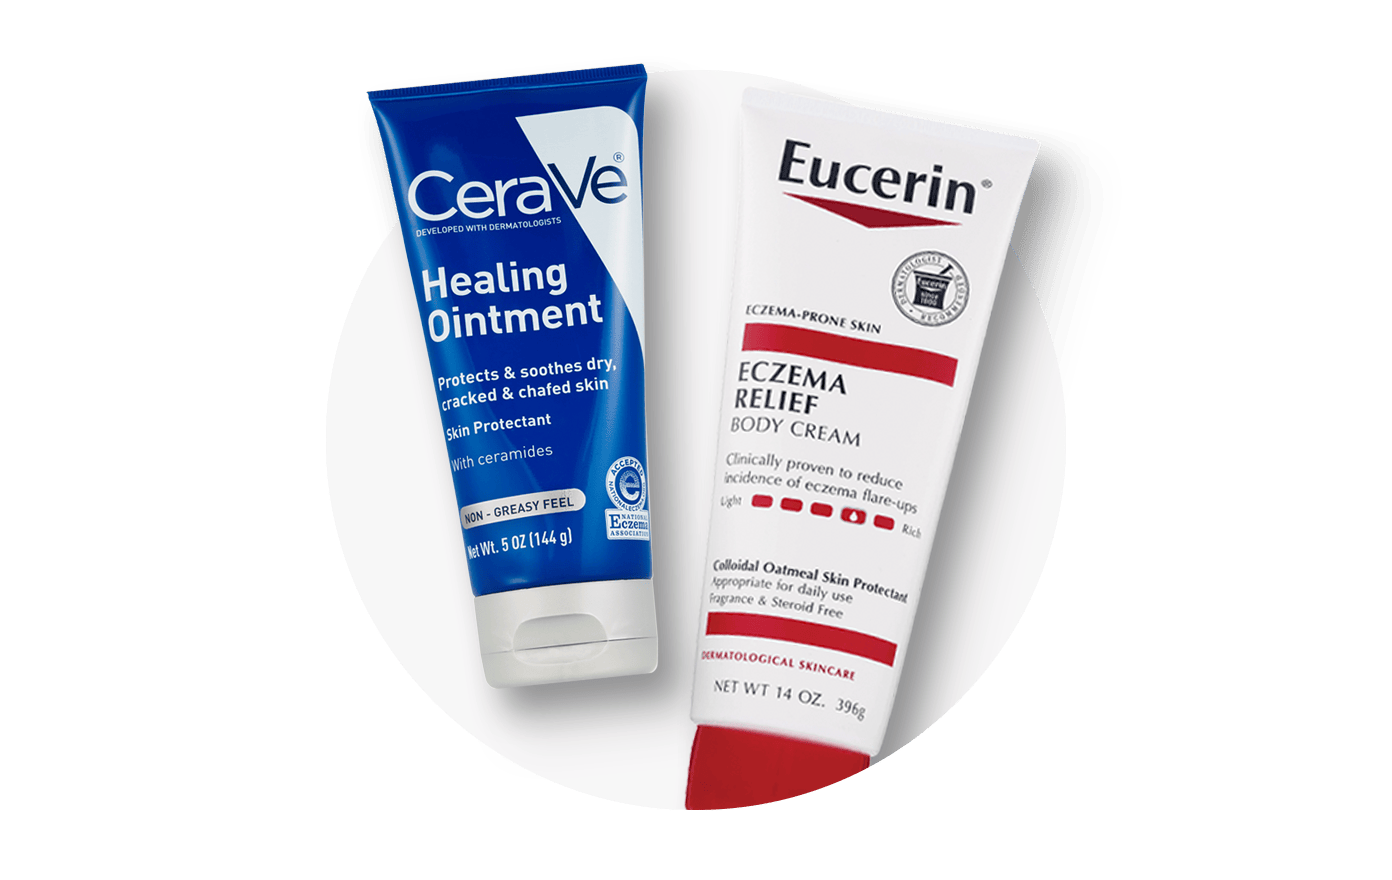 Body lotions and moisturizers, showing CeraVe and Eucerin products